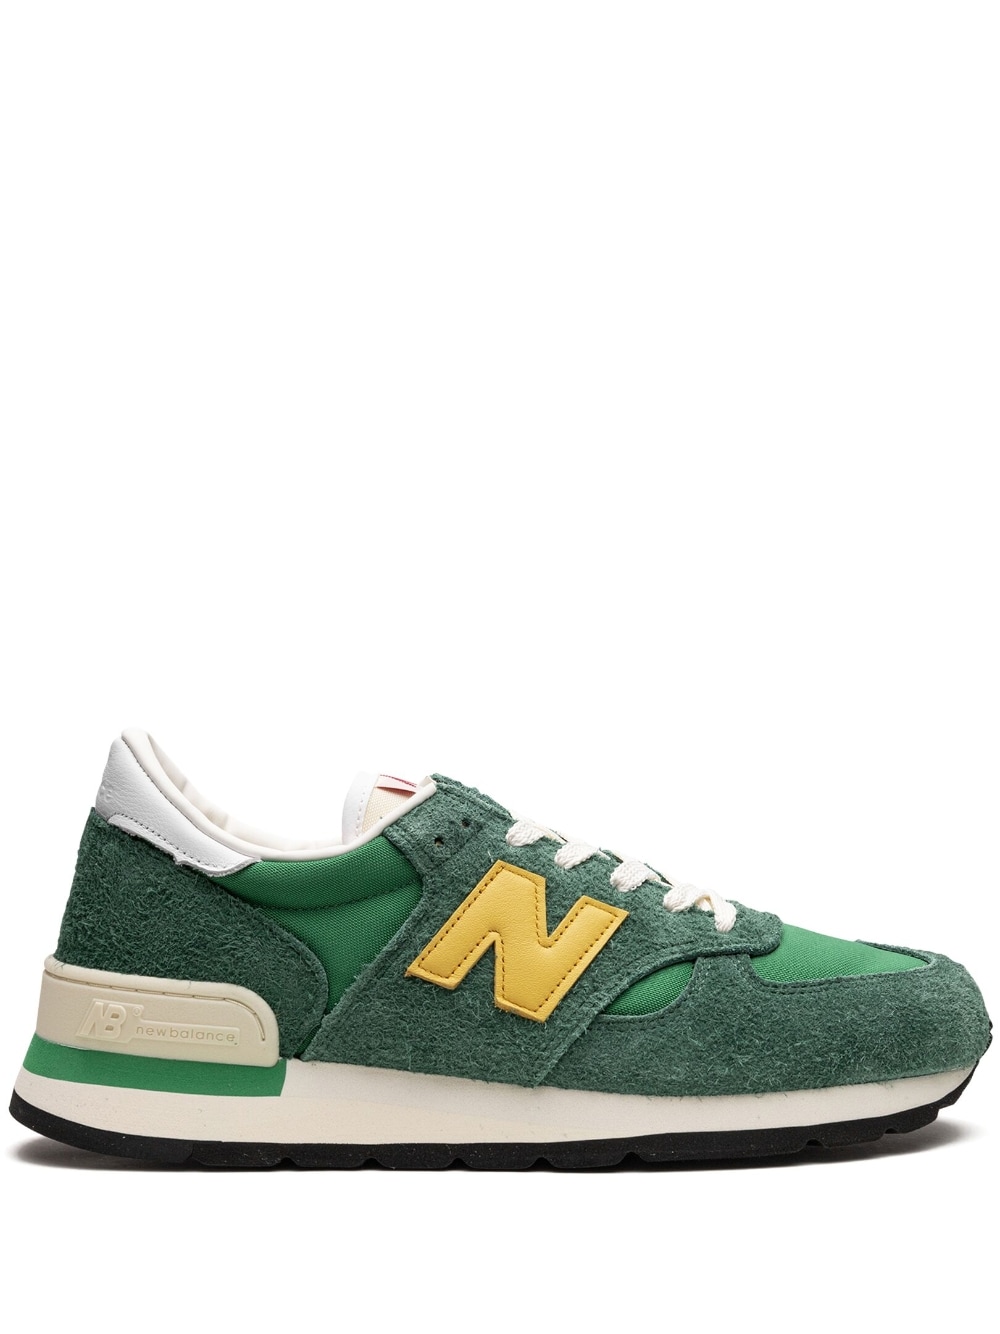 New Balance 990 V1 "Green/Gold" sneakers